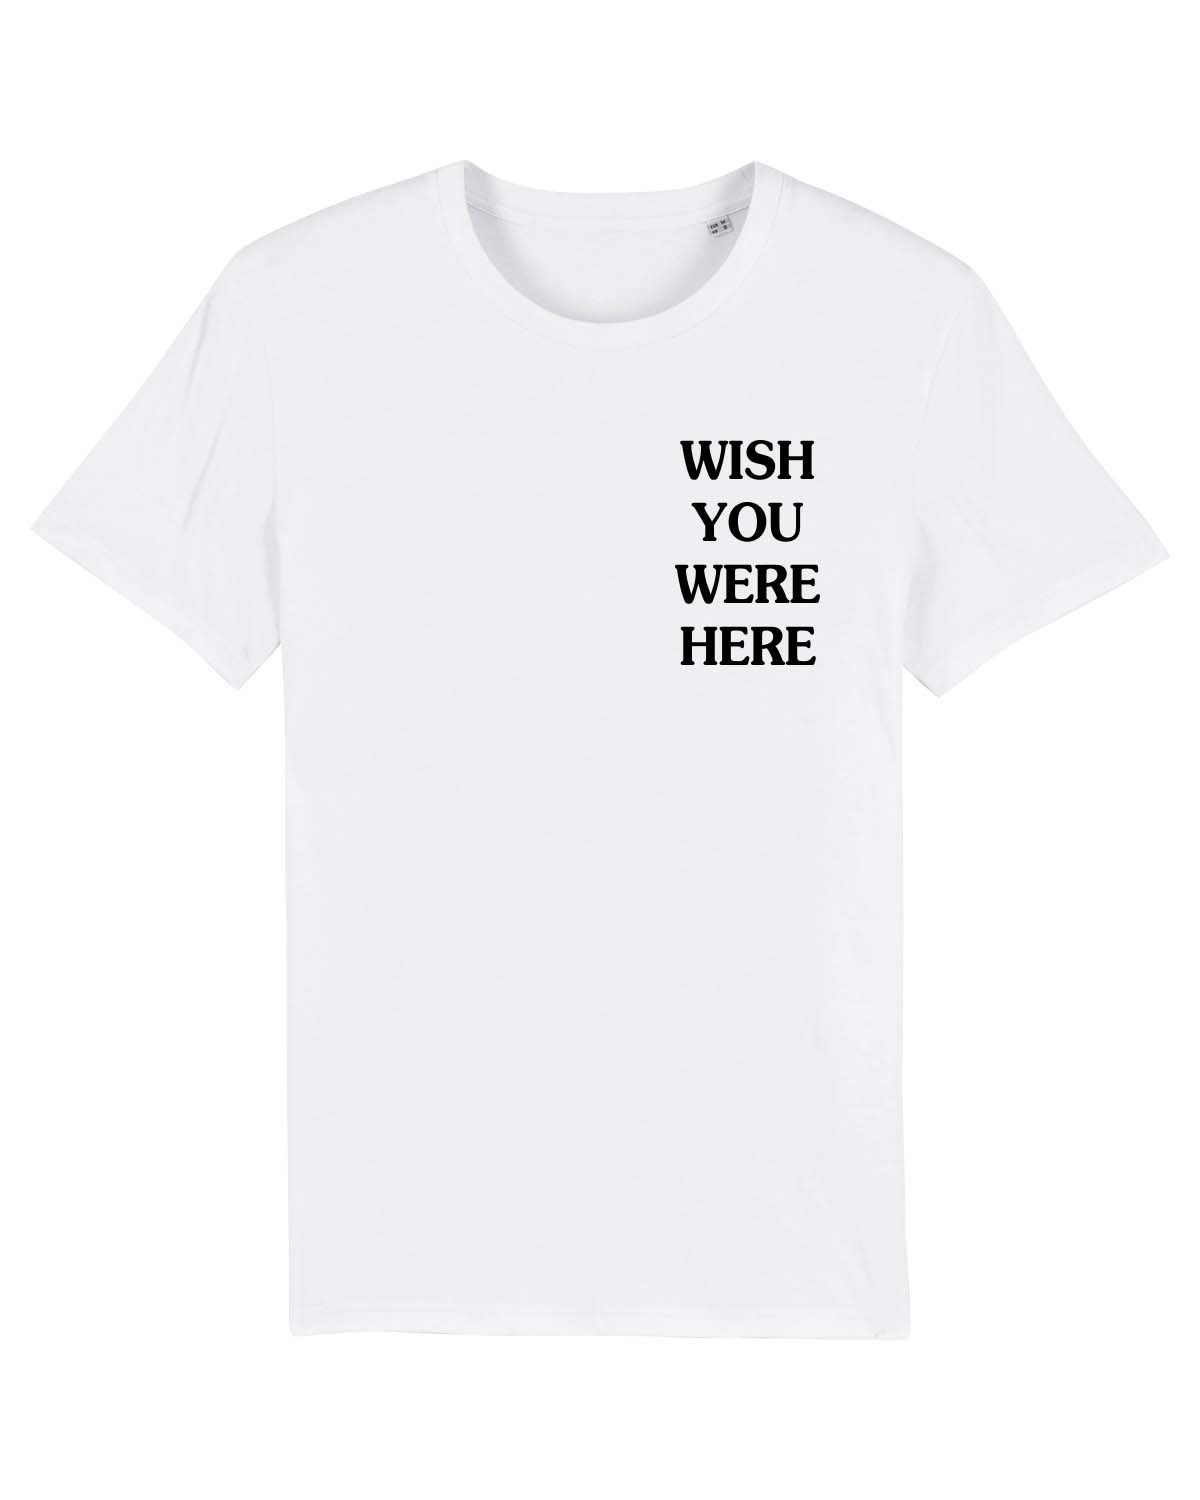 T shirt Astroworld Don't mess with Texas Wish you were here